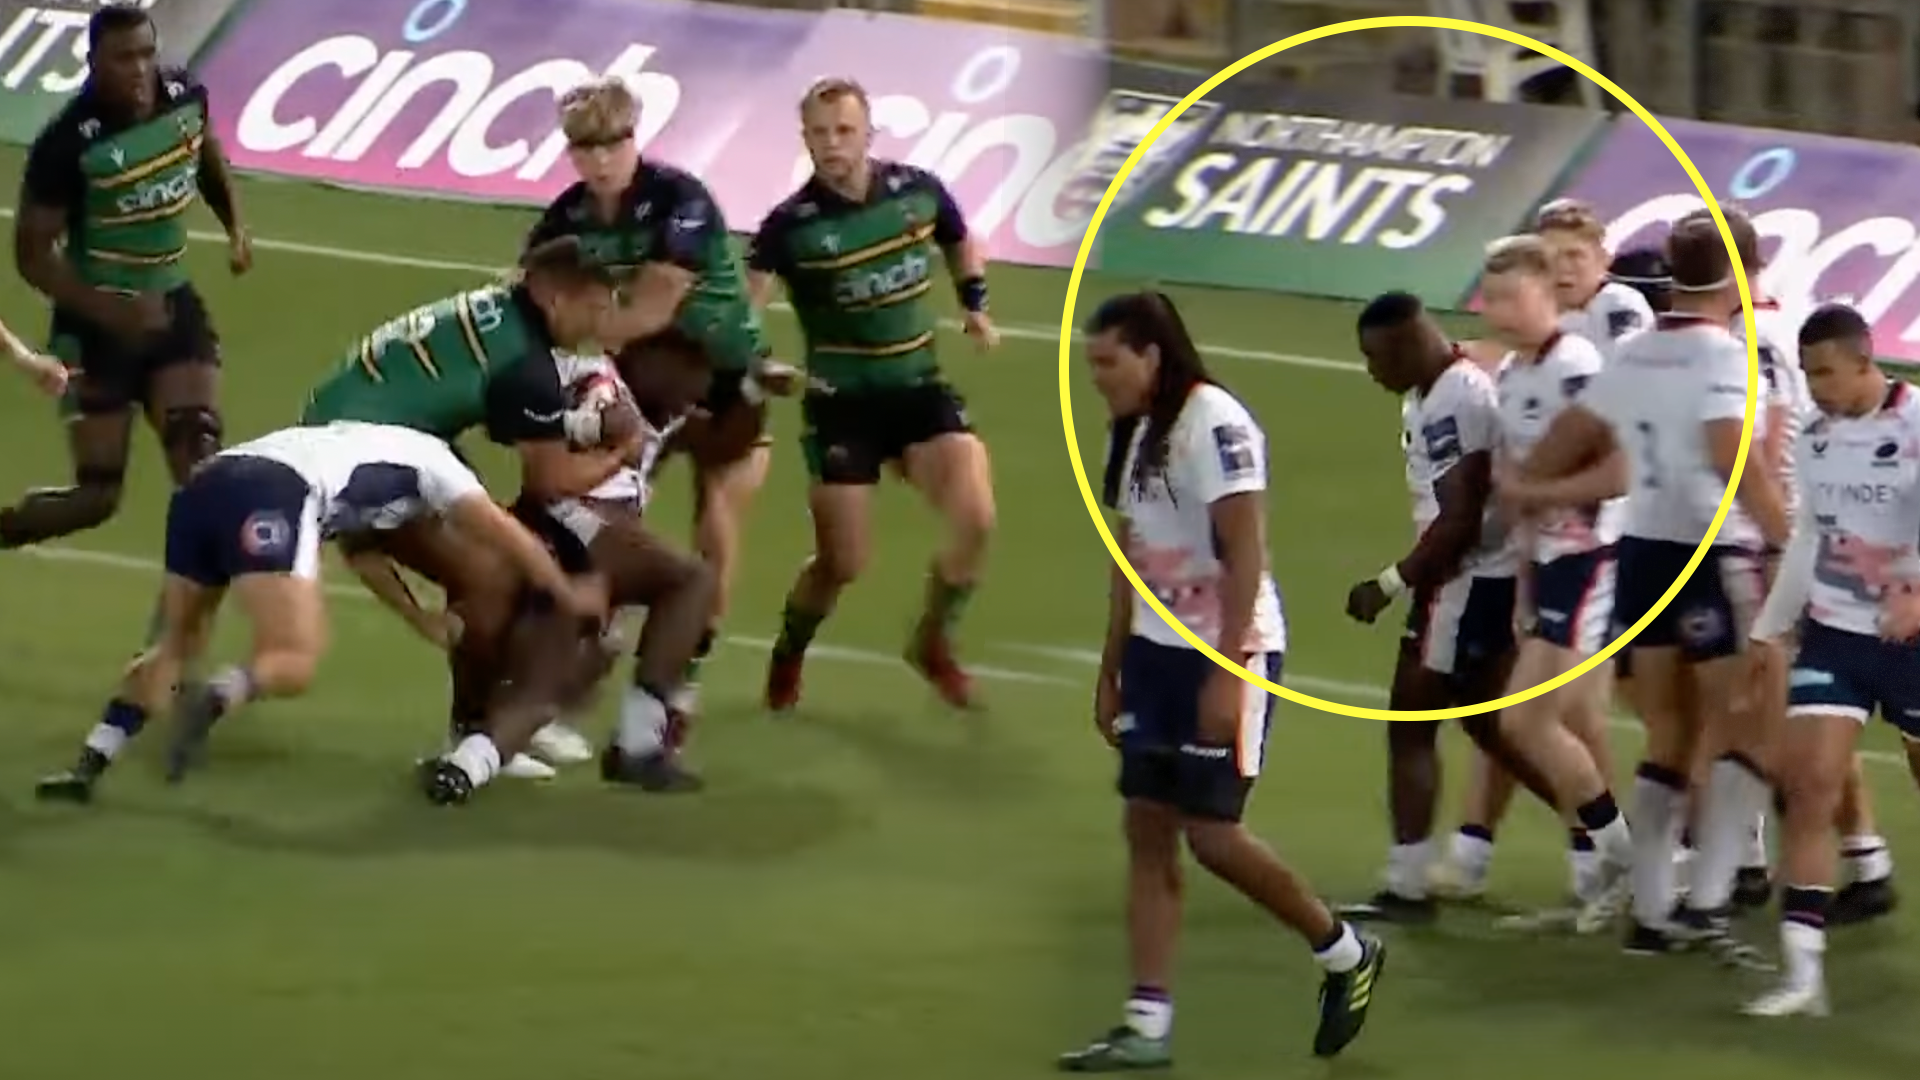 Saracens' 20-year-old hooker looked freakishly strong in four-try display